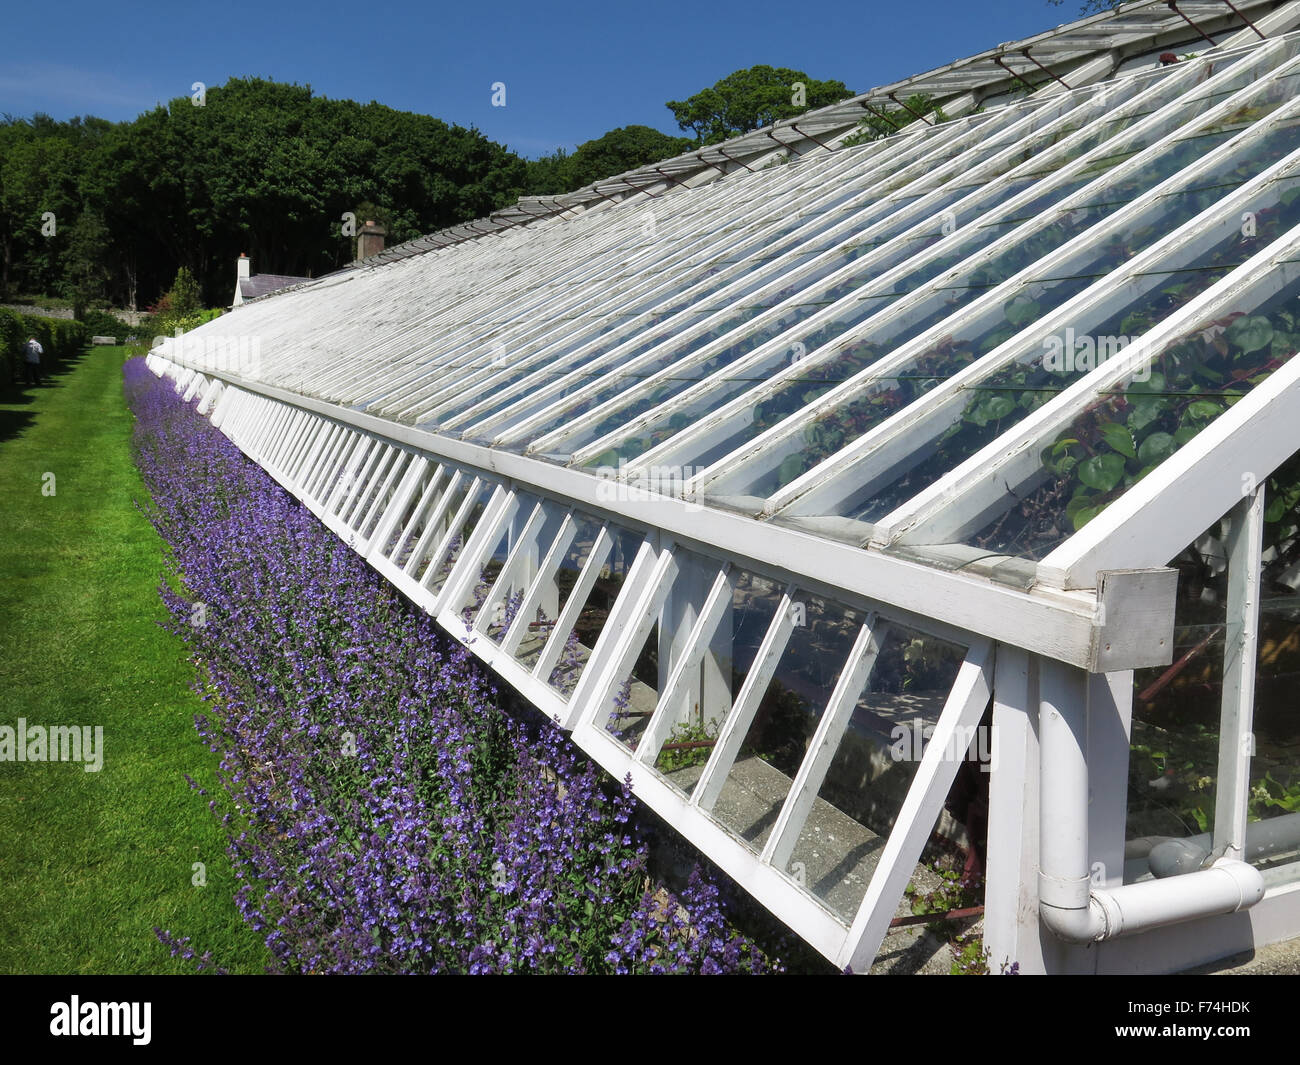 Nepeta flower and the Glass house at Glenarm Castle walled garden, Northern Ireland. Stock Photo